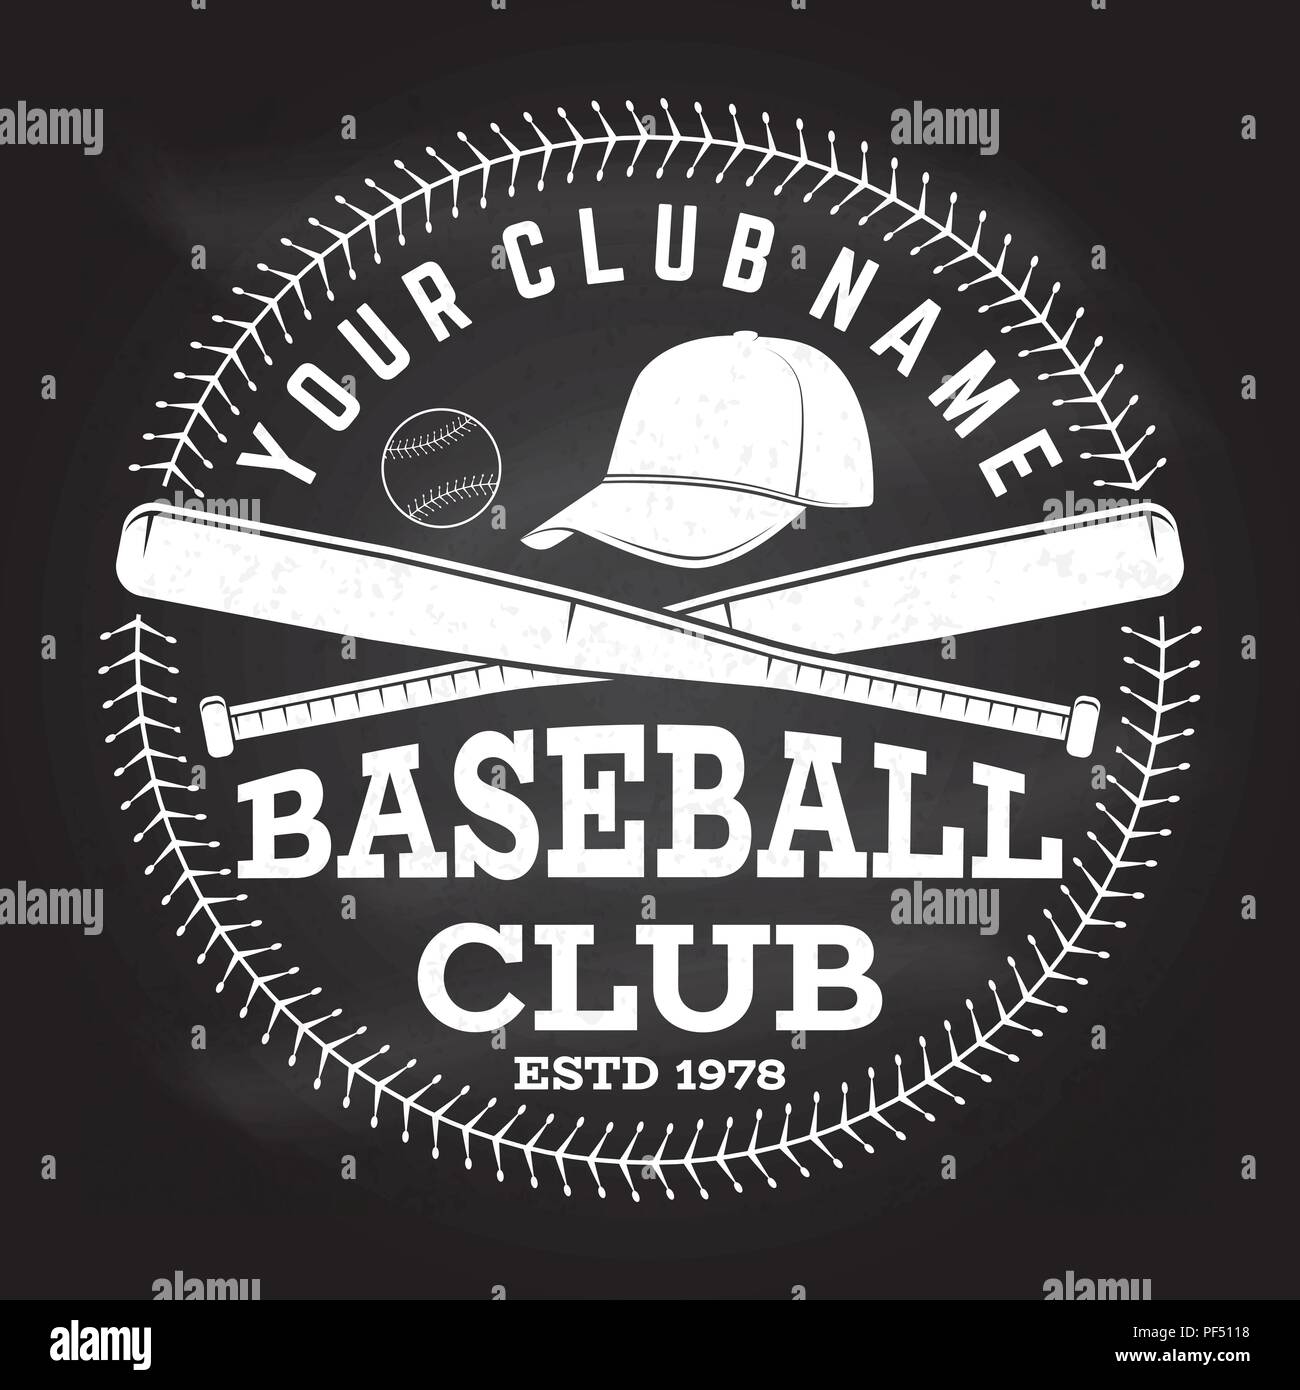 Baseball club badge on the chalkboard. Vector illustration. Concept for shirt or logo, print, stamp or tee. Vintage typography design with baseball bats, cap and ball for baseball silhouette. Stock Vector